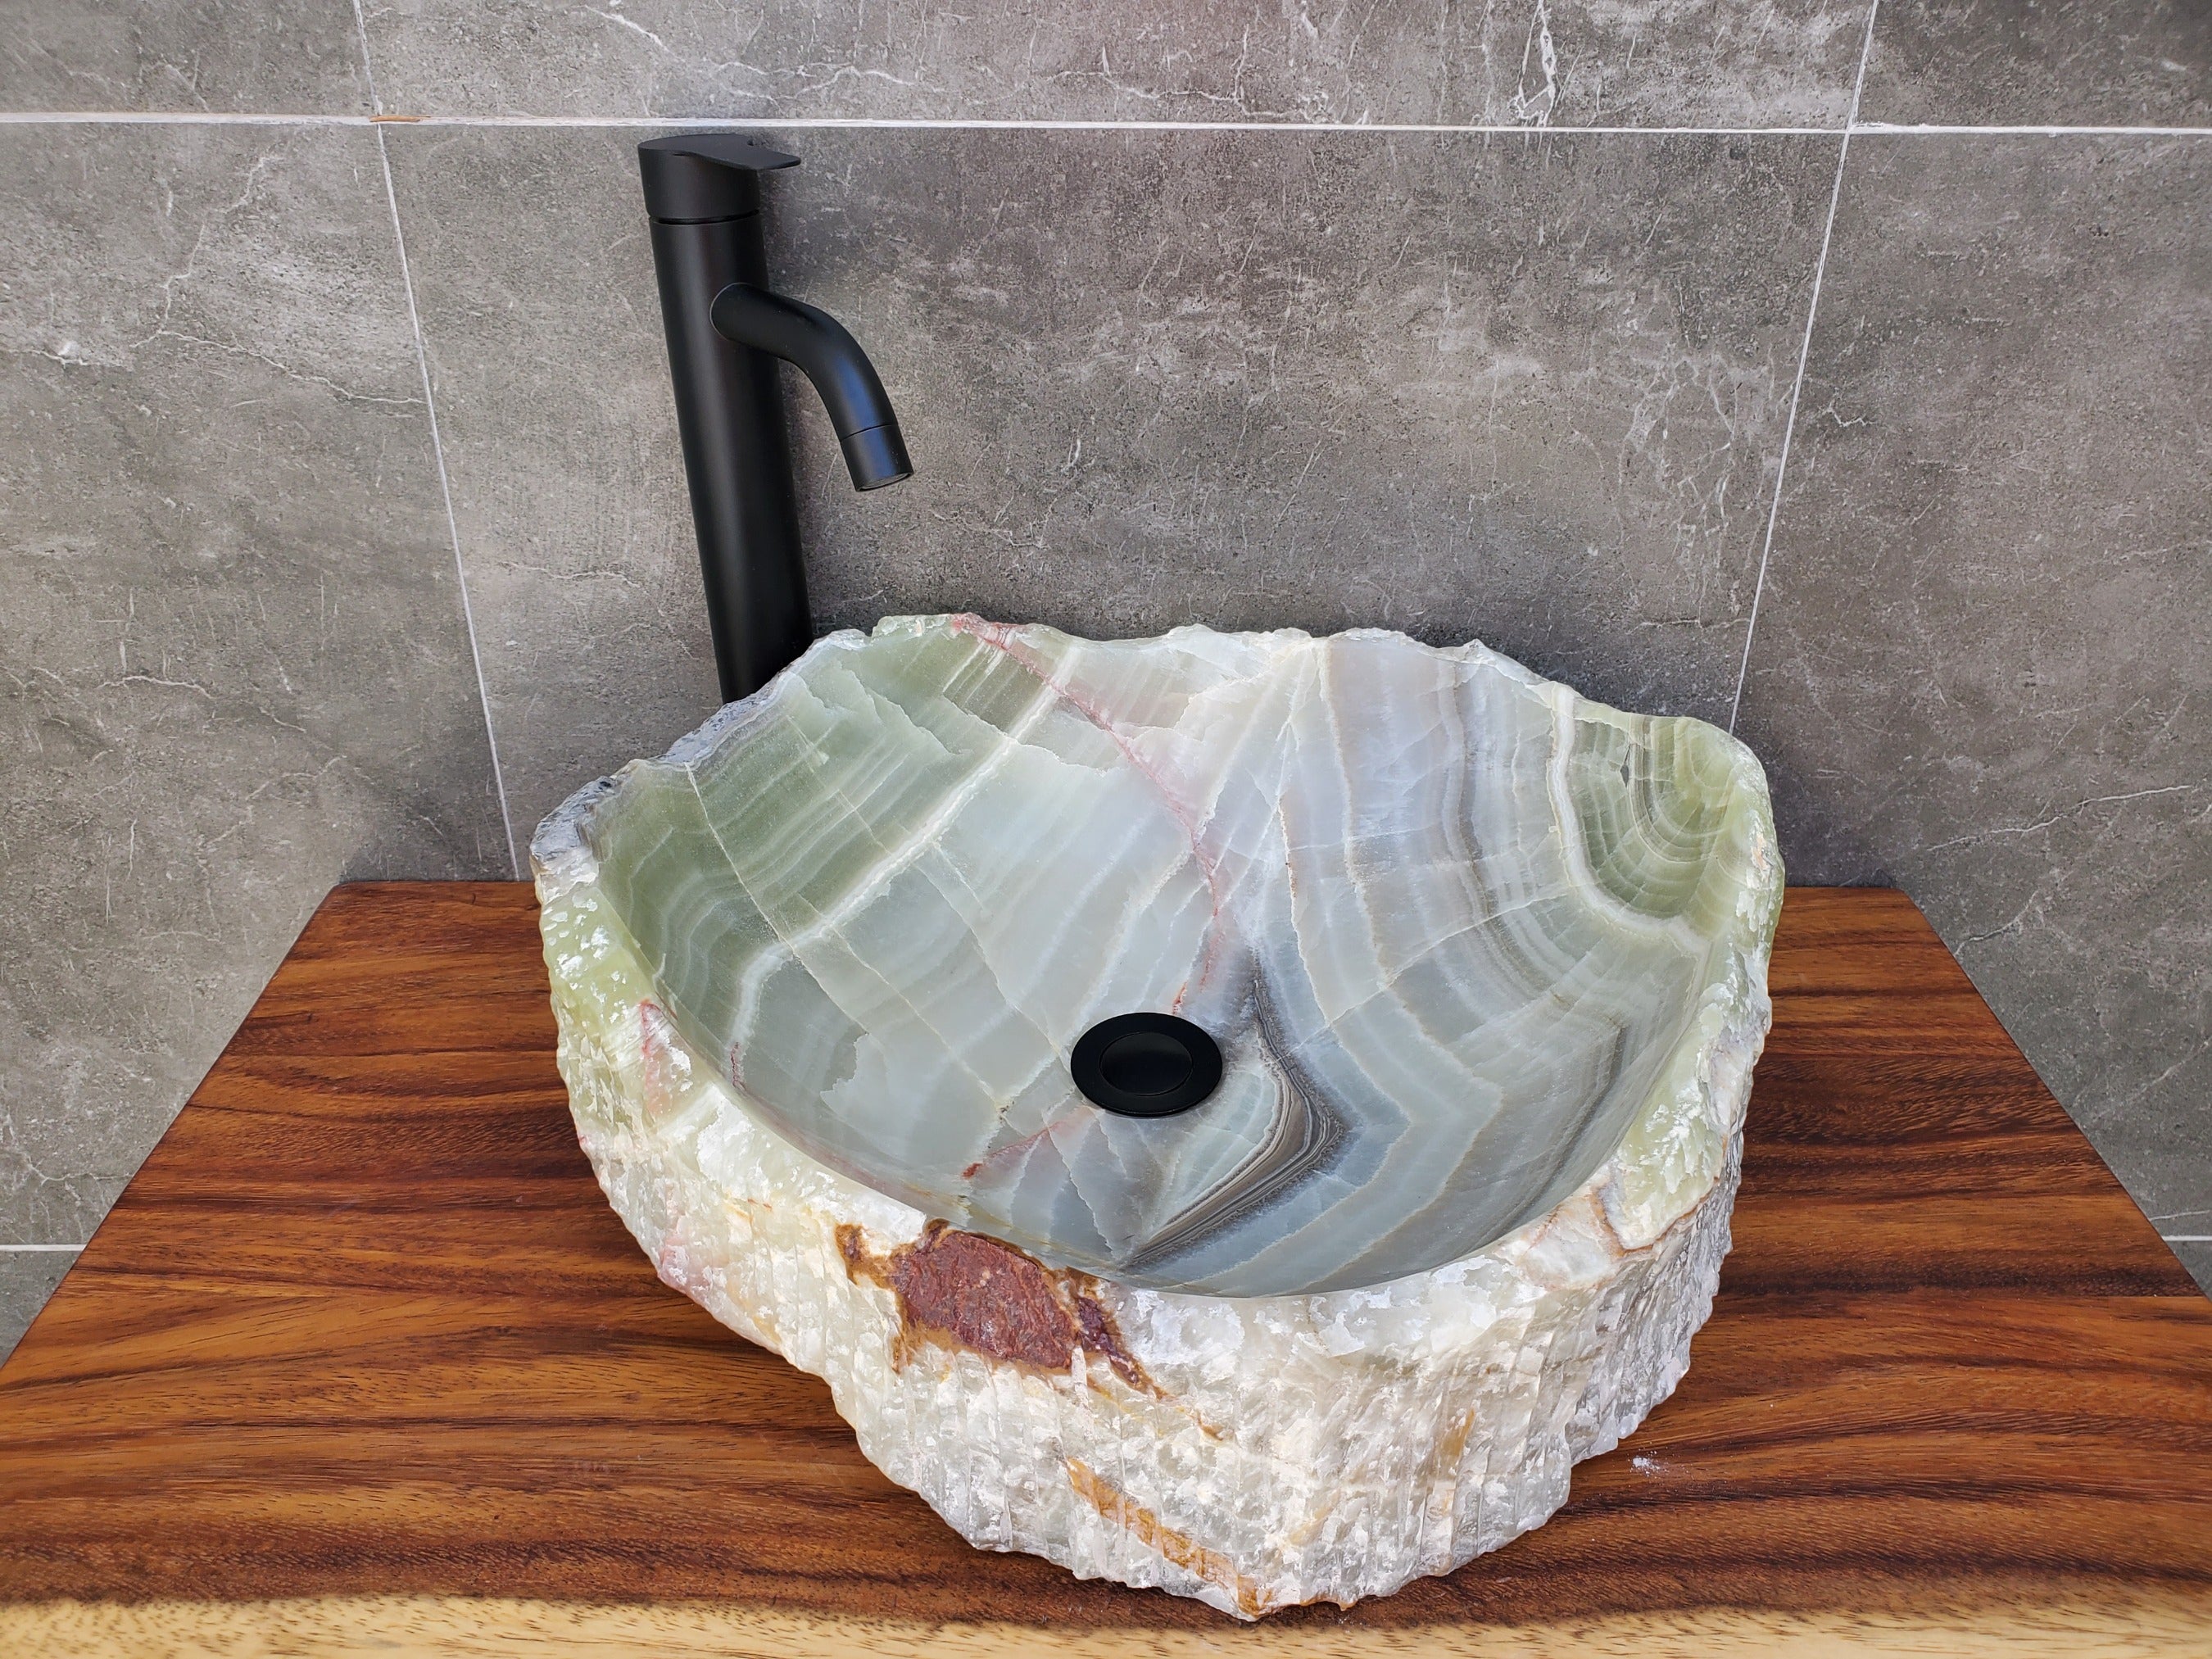 Green Onyx Stone Vessel Bathroom Sink. Above Counter. It is one of a kind and a beautiful work of art. Handmade in Mexico. Hand Finished in the USA. Ships from the USA. Buy now at www.felipeandgrace.com. 